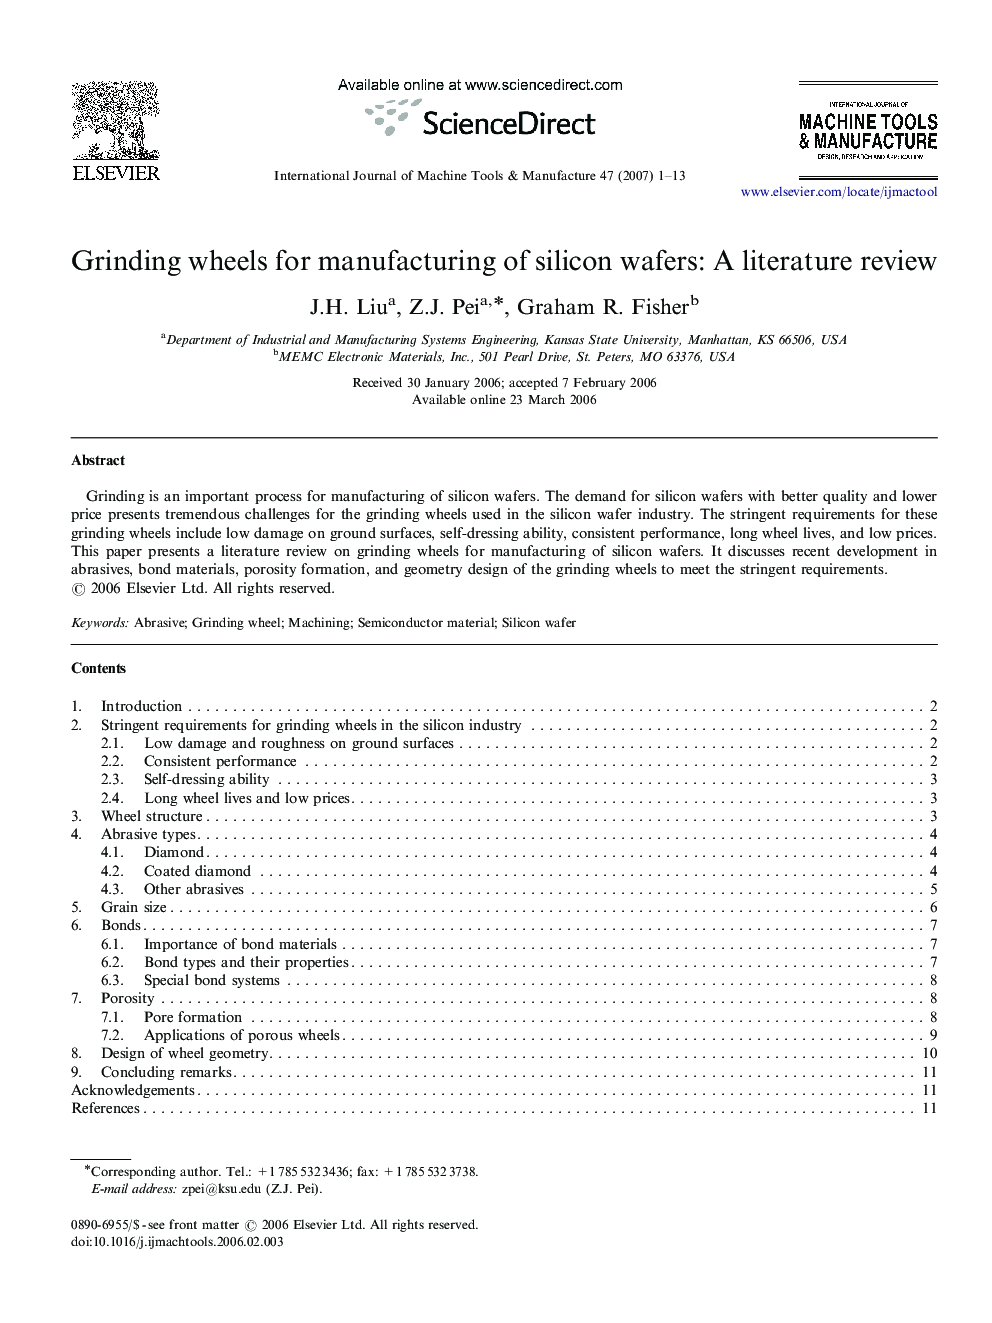 Grinding wheels for manufacturing of silicon wafers: A literature review